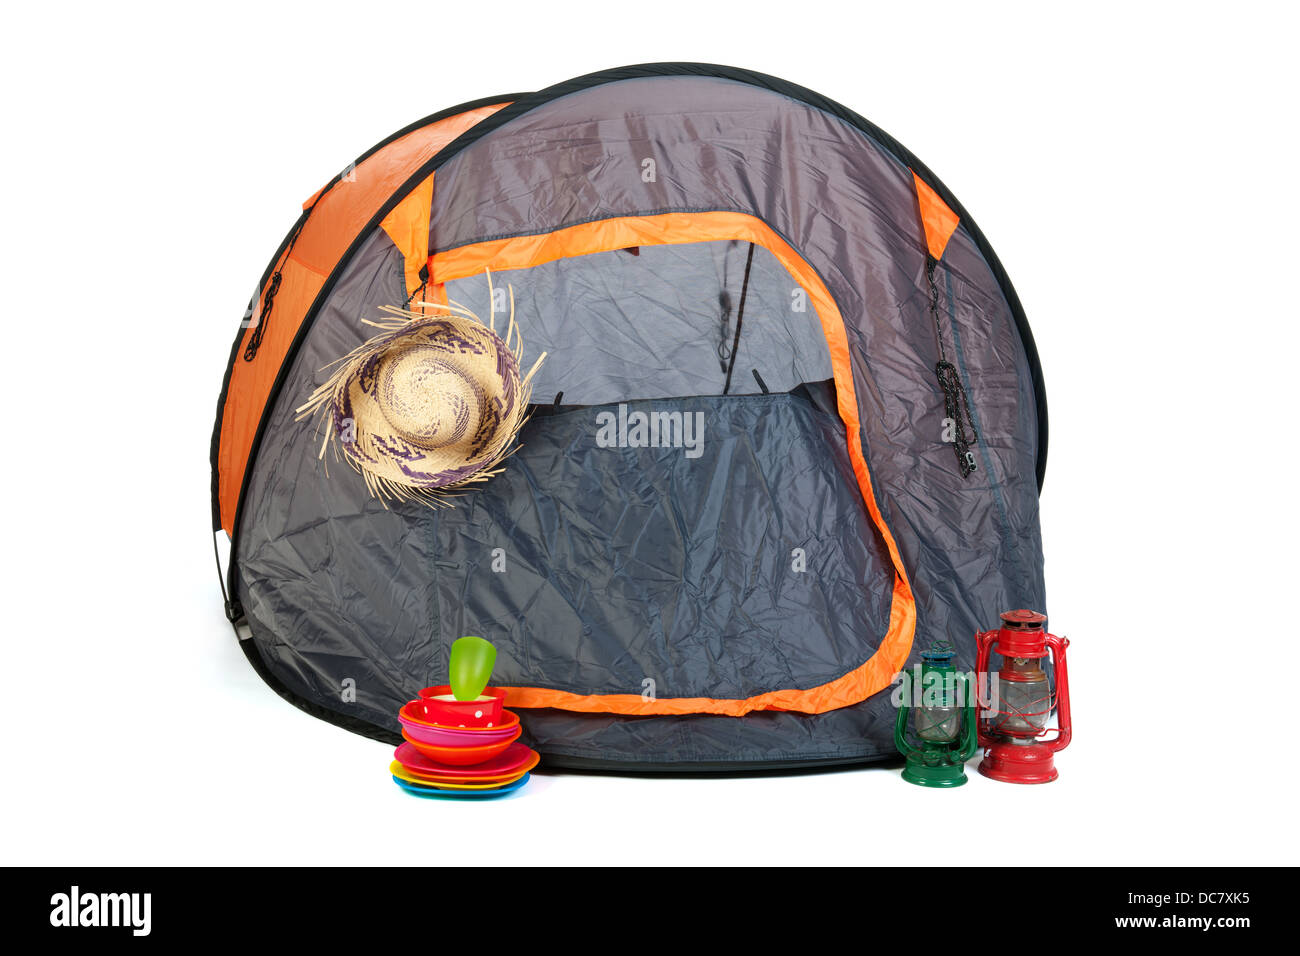 isolated tent on camping with light equipment Stock Photo